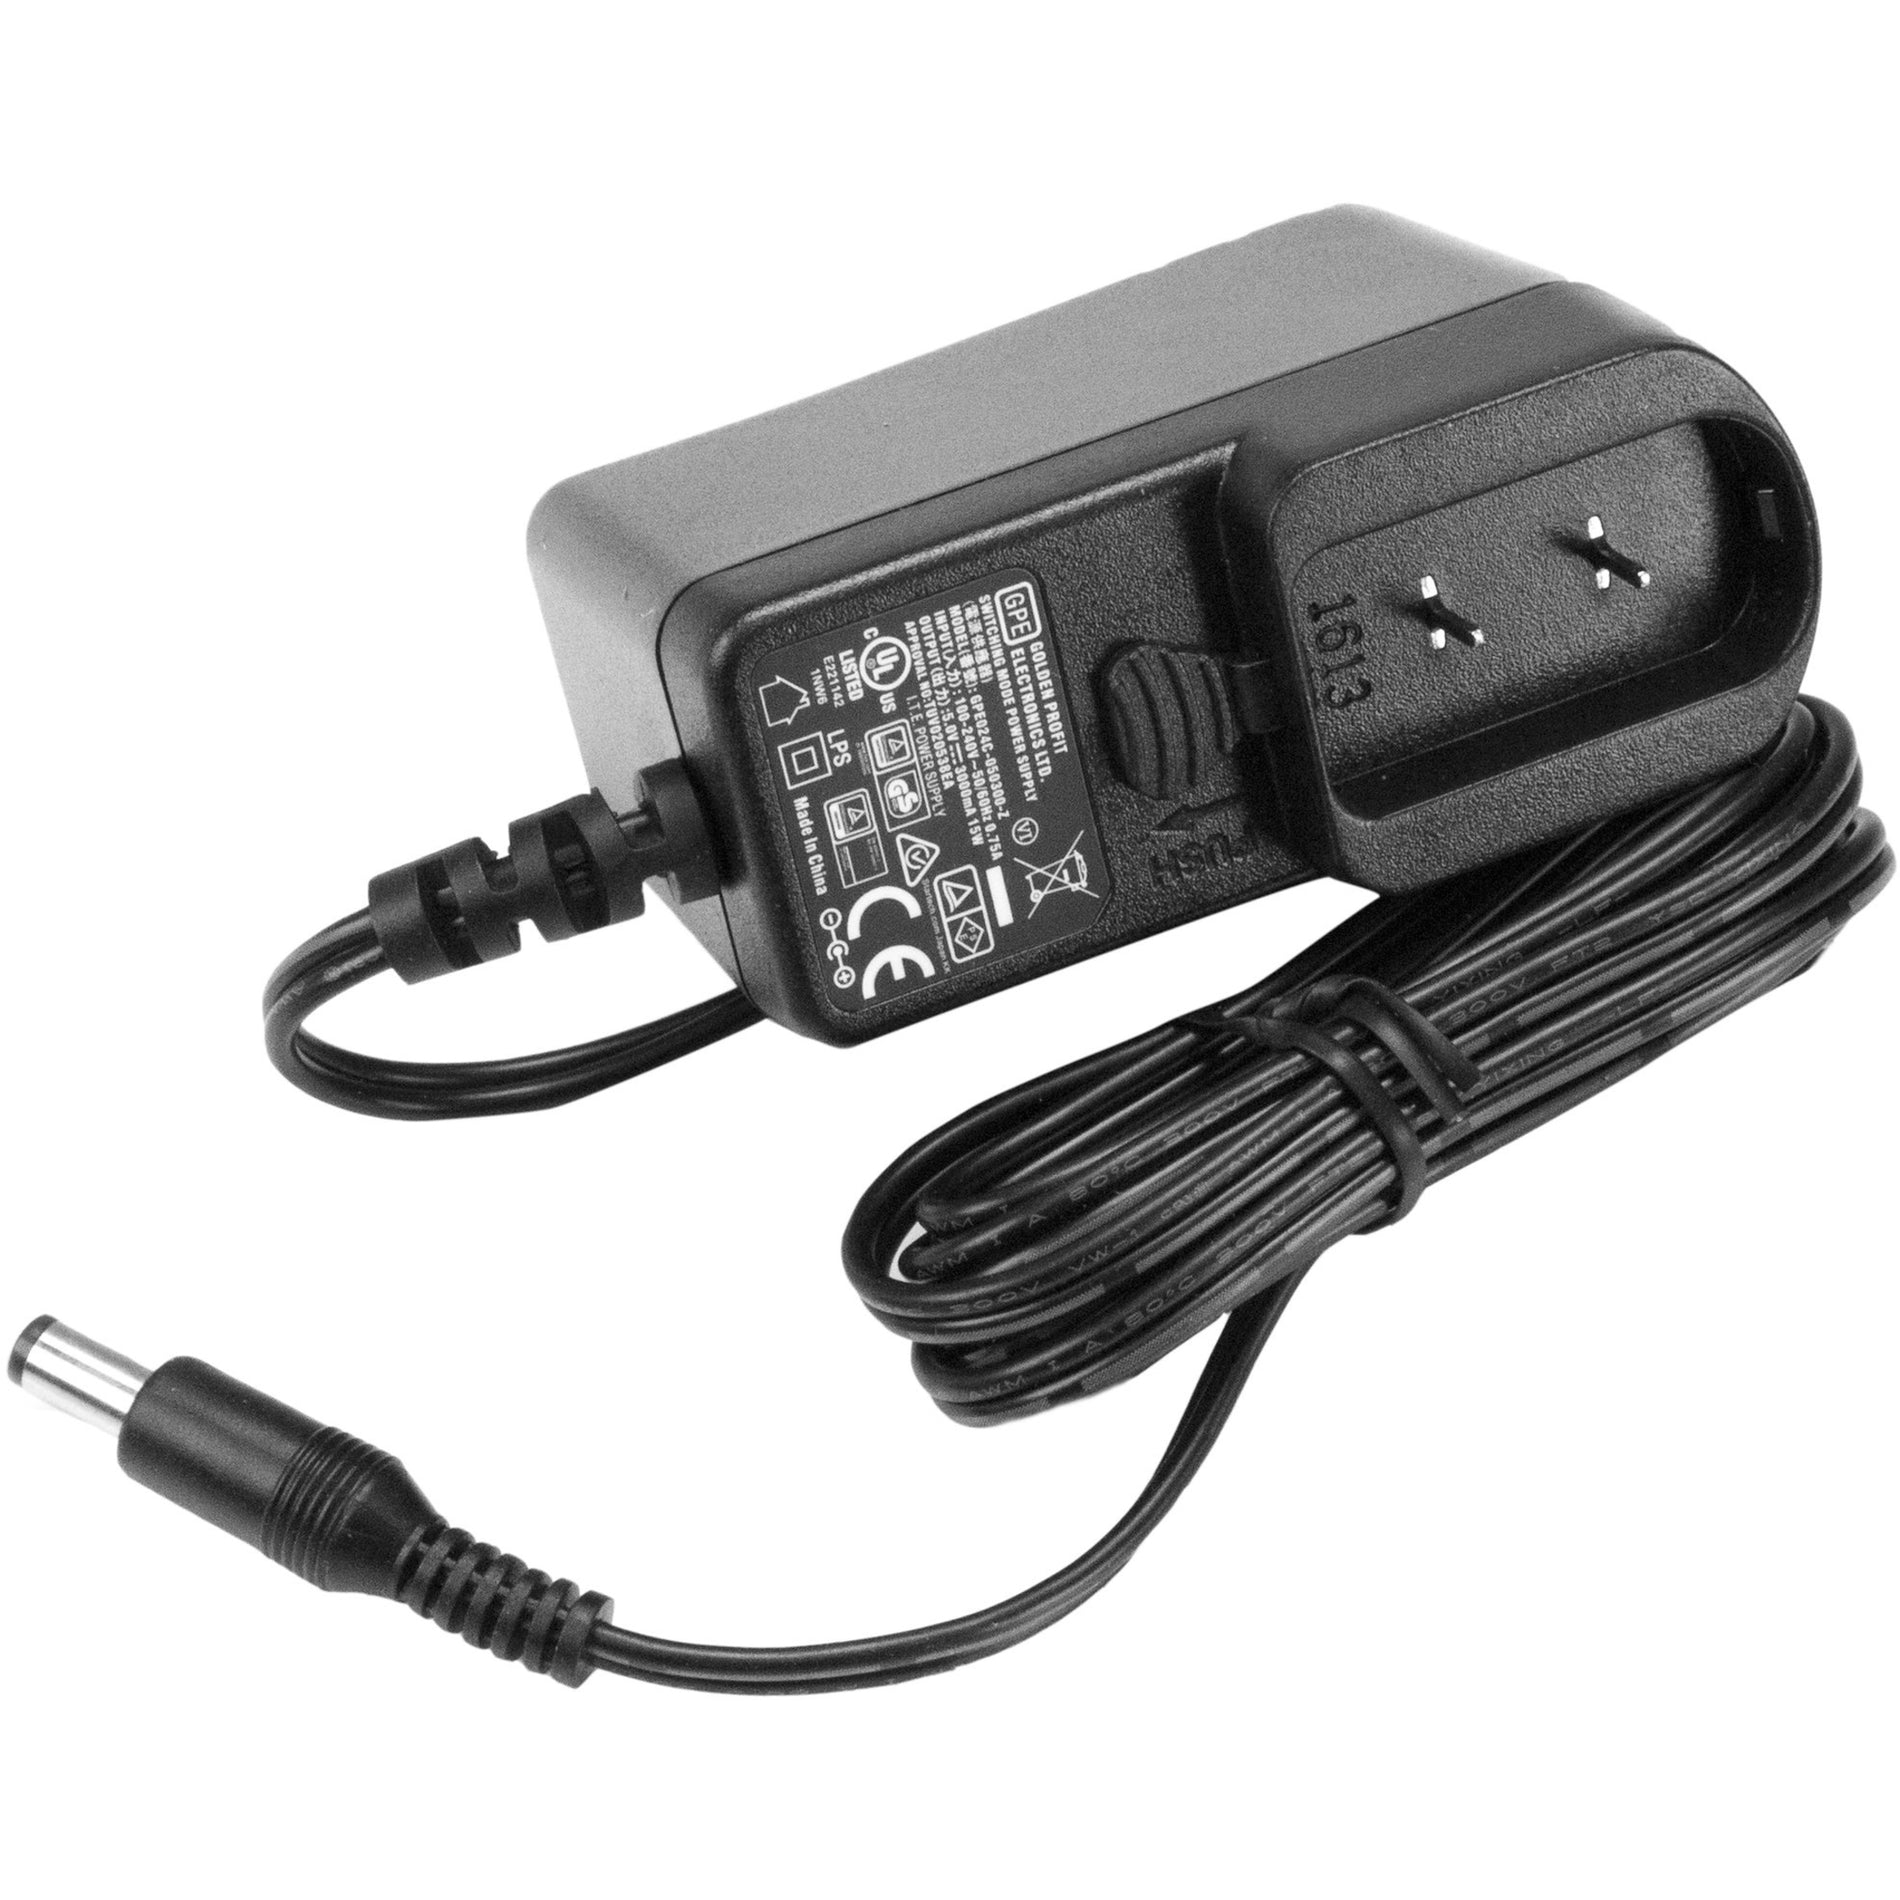 StarTech.com SVA5N3NEUA Replacement 5V DC Power Adapter - Replace your lost or failed power adapter